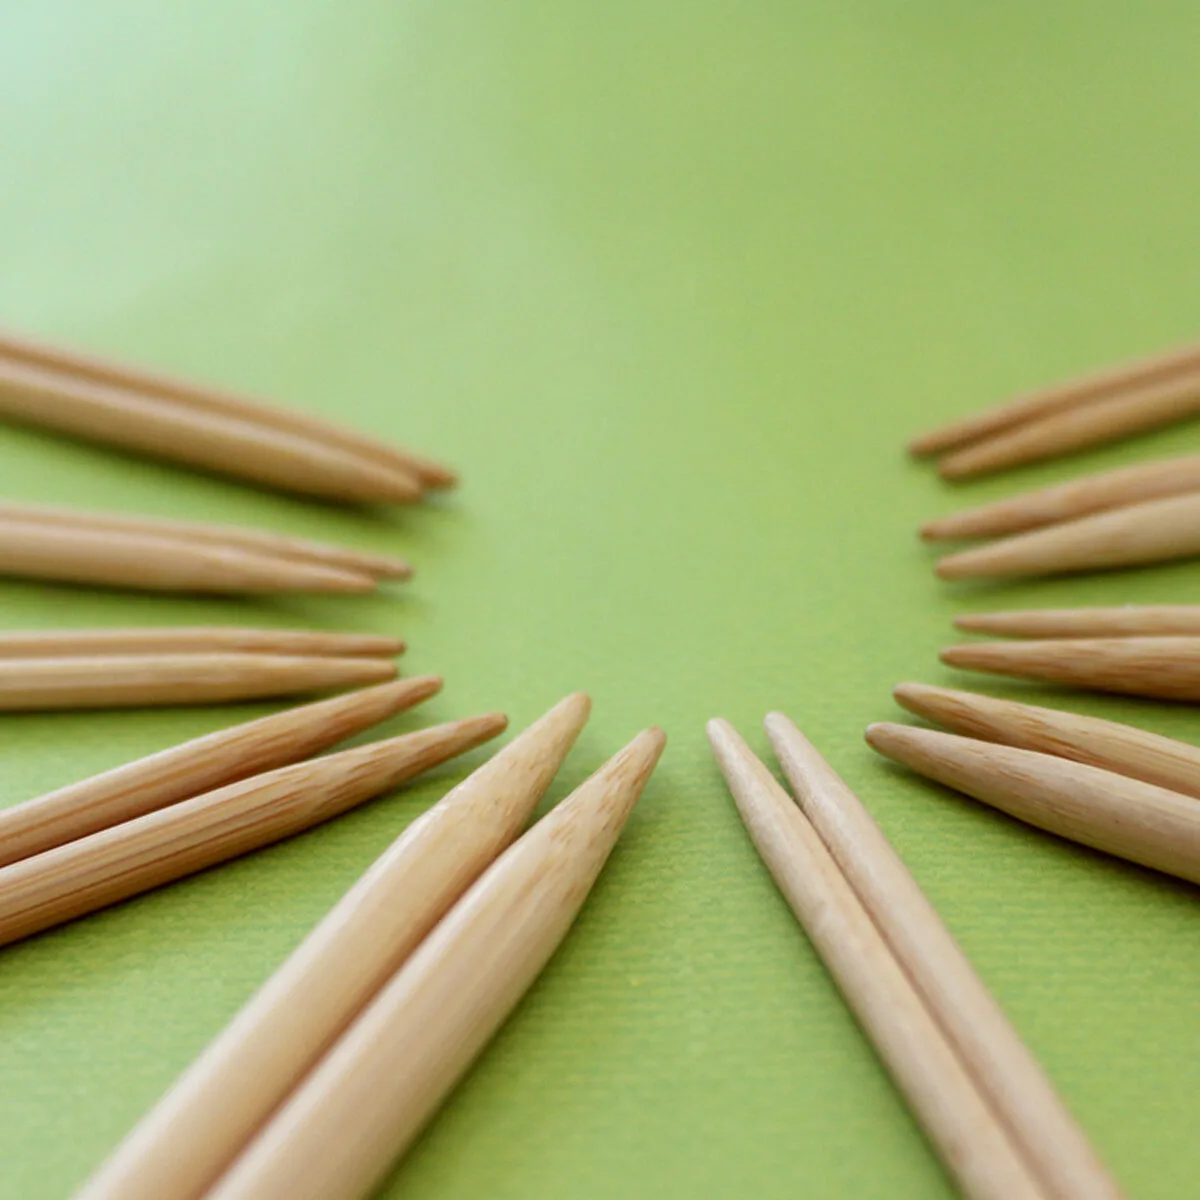 What Are The Best Knitting Needles for Beginners?